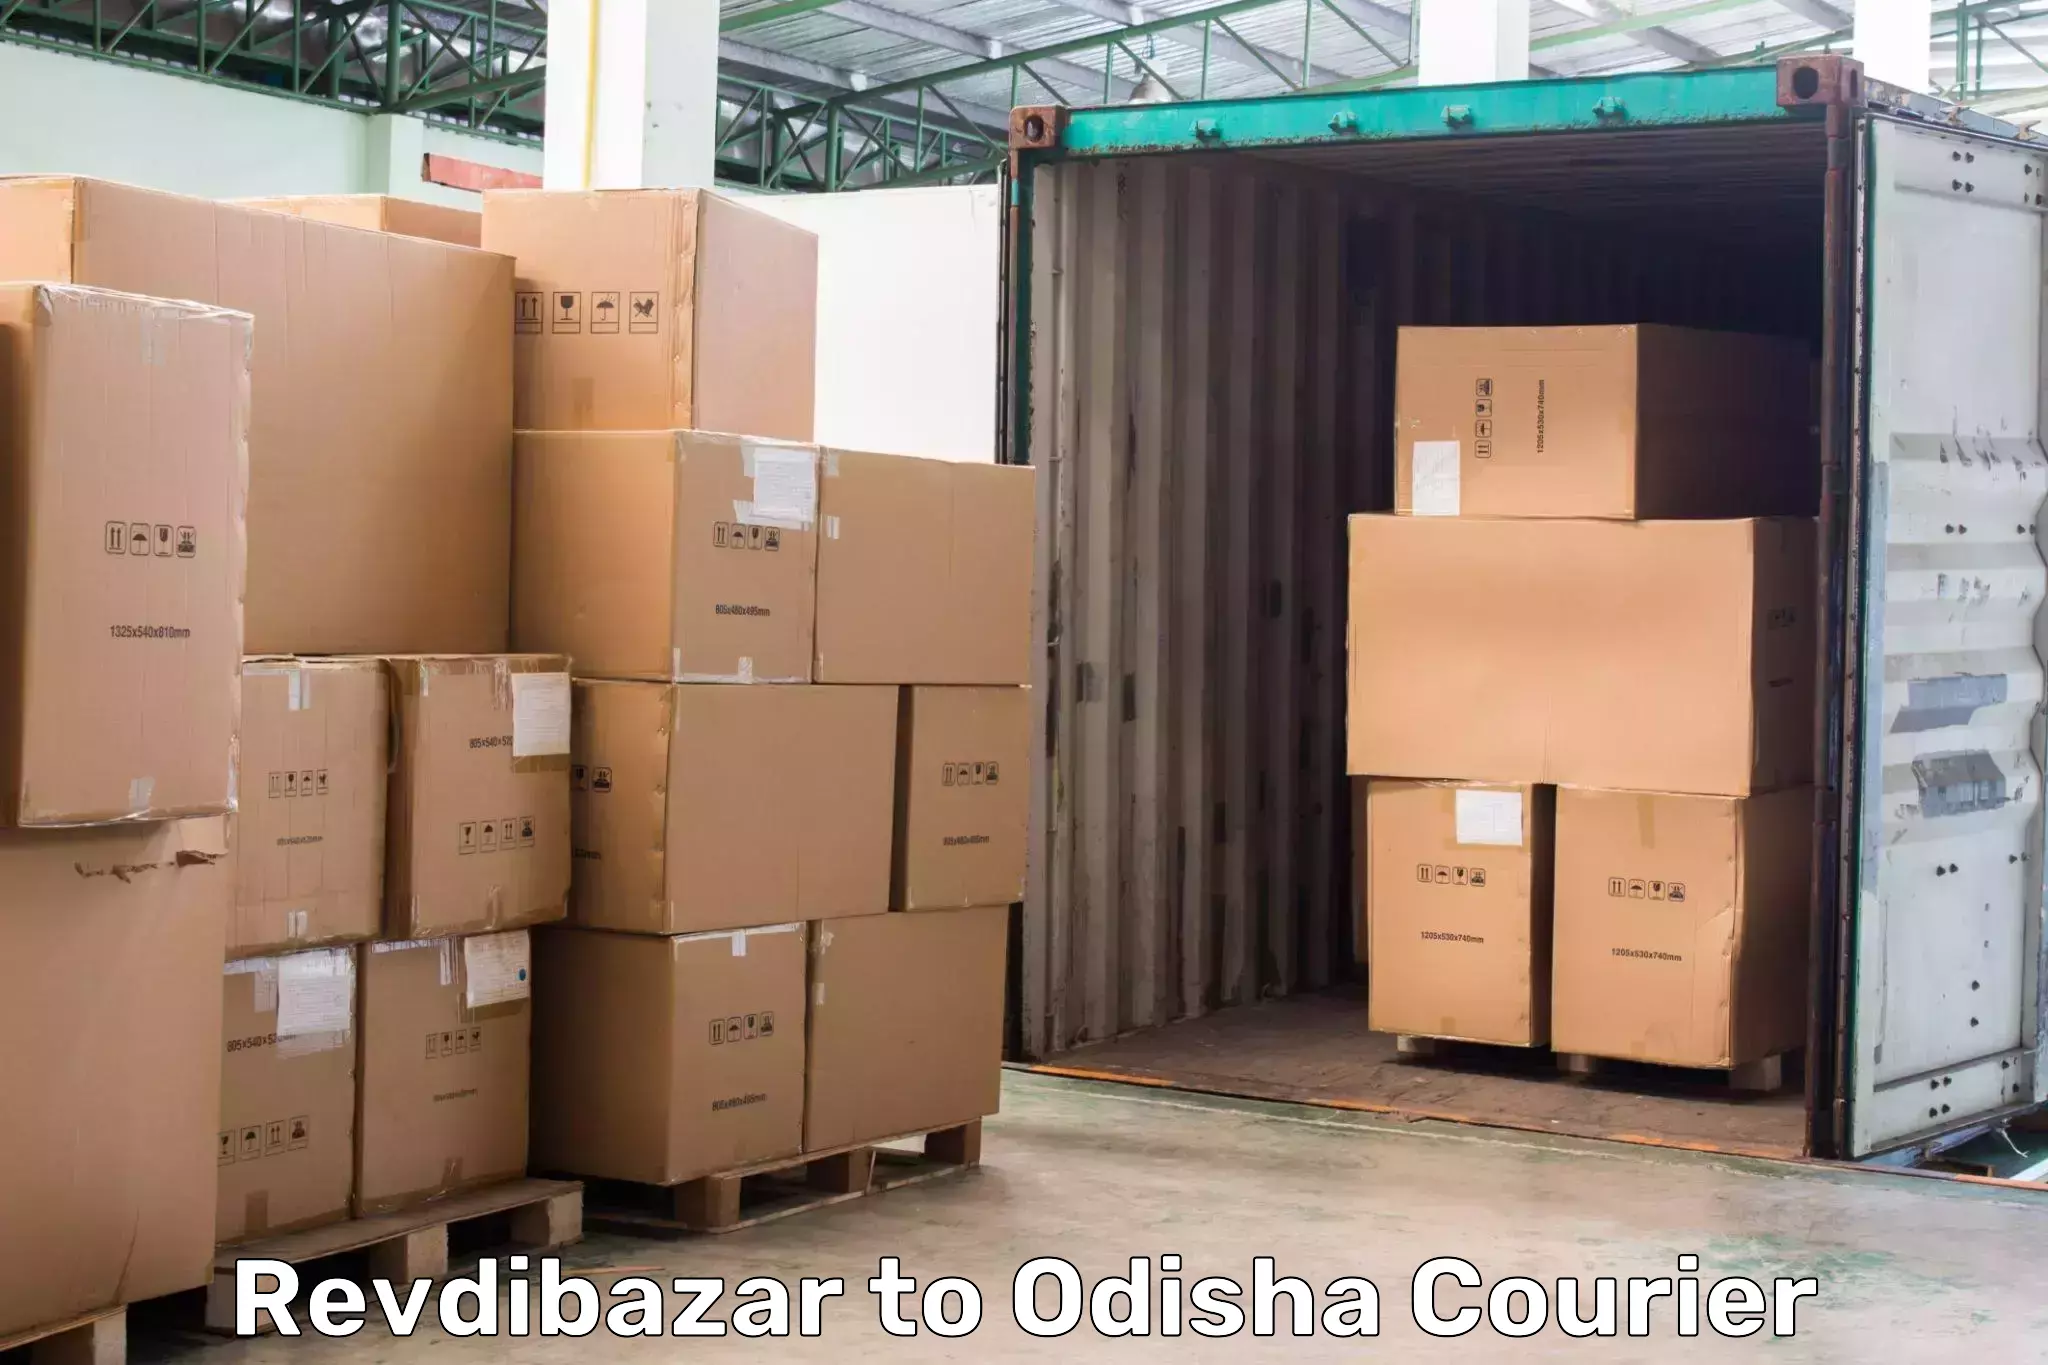 Overnight delivery services Revdibazar to Bhawanipatna